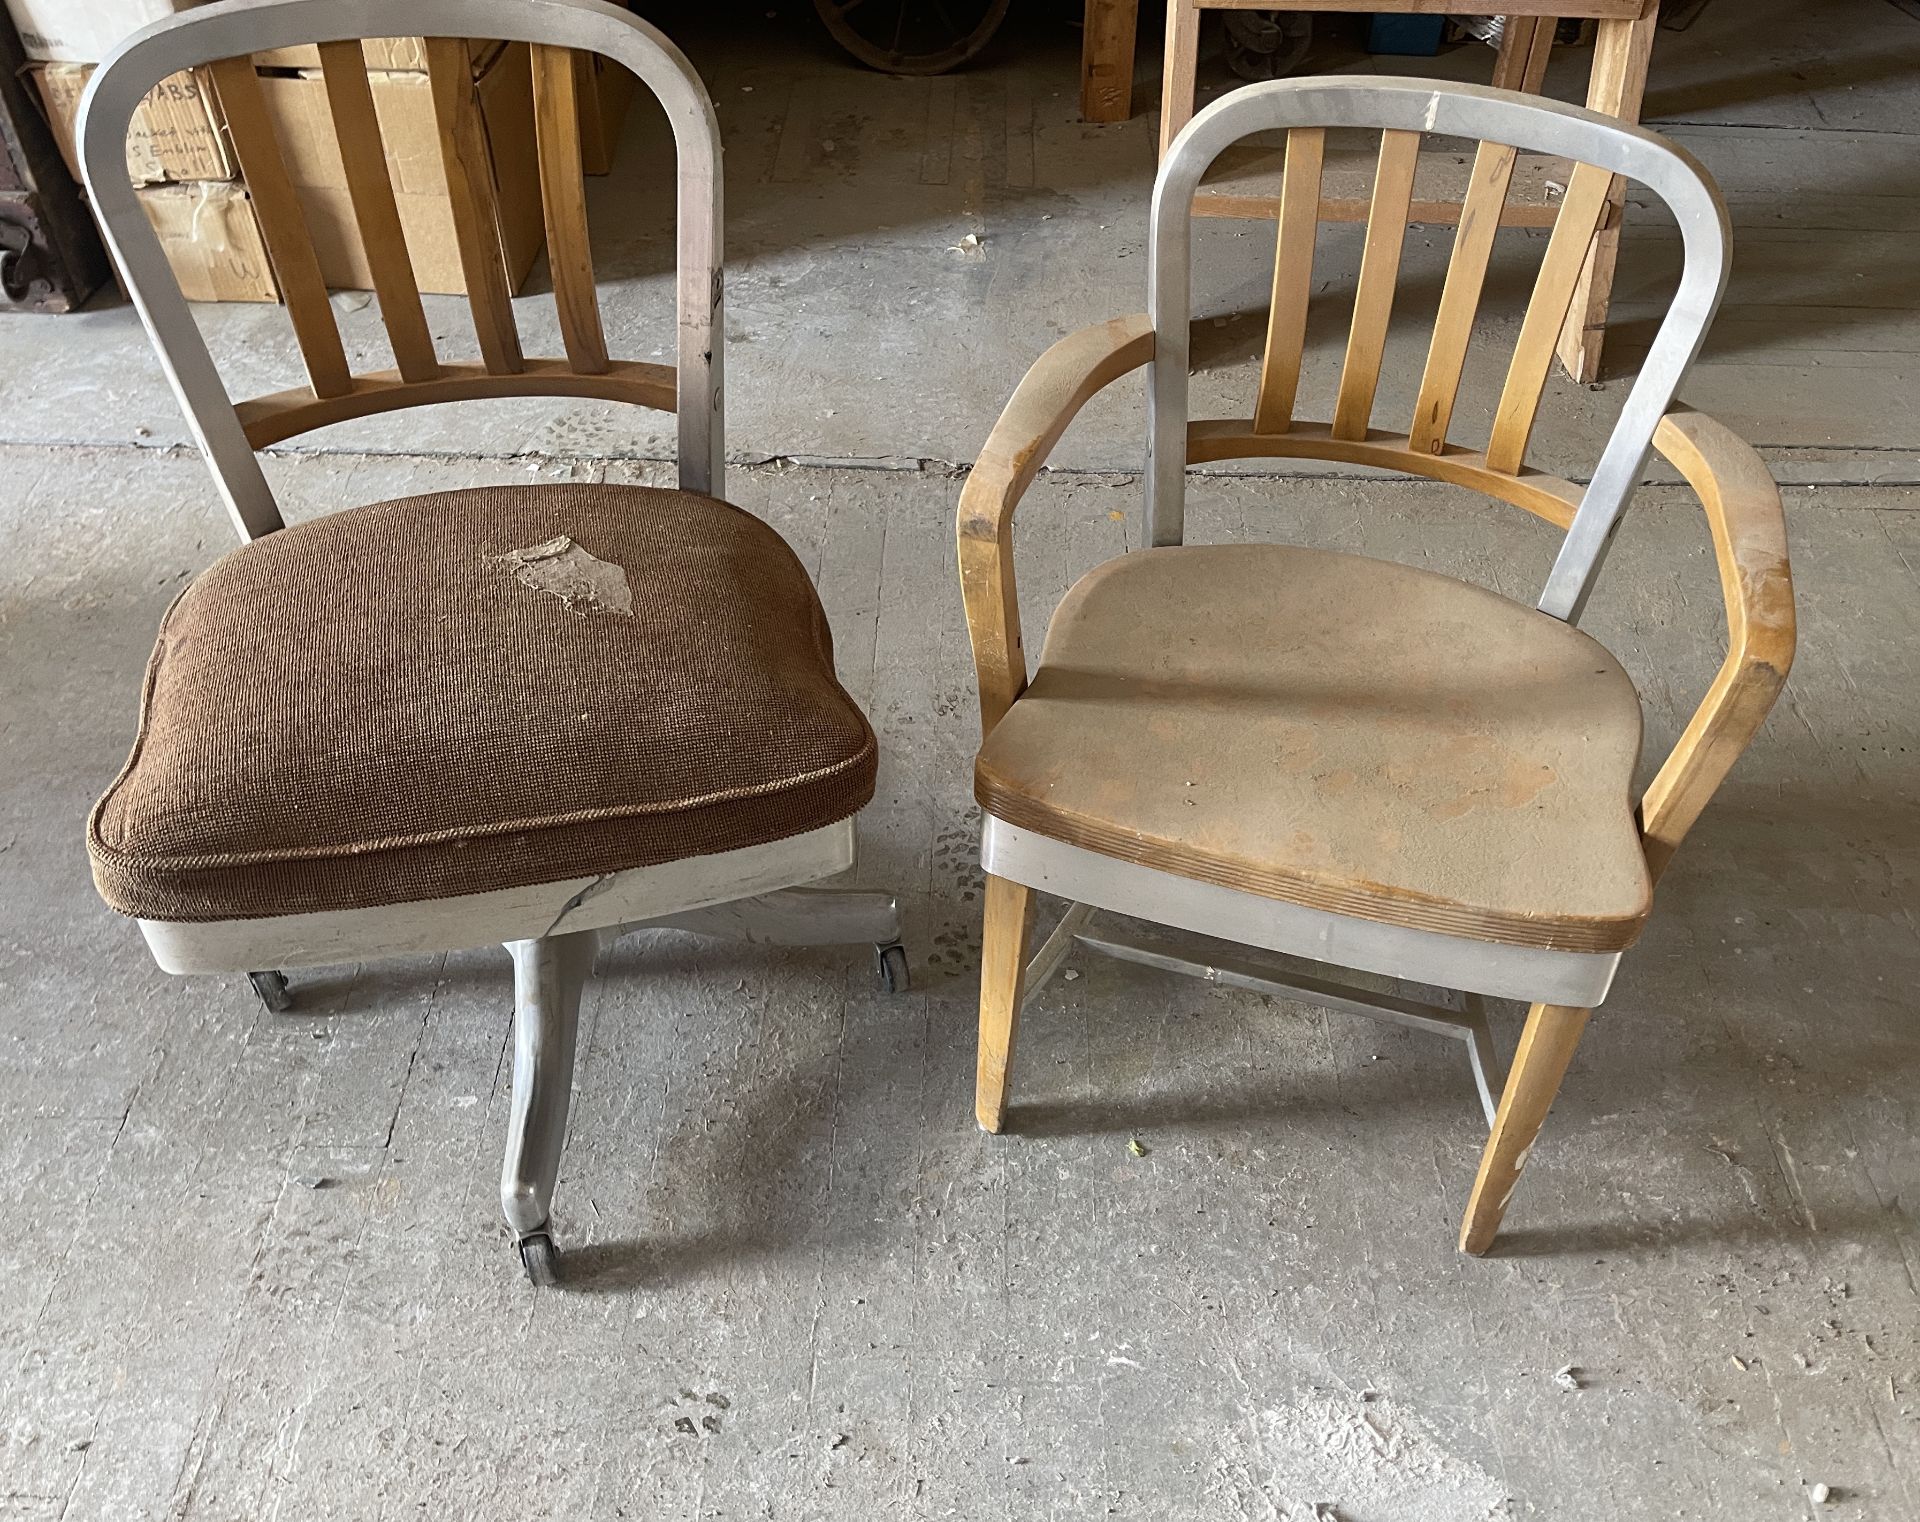 2 SHAW WALKER VINTAGE ART DECO OFFICE CHAIRS, VALUED $1500 - Image 3 of 4